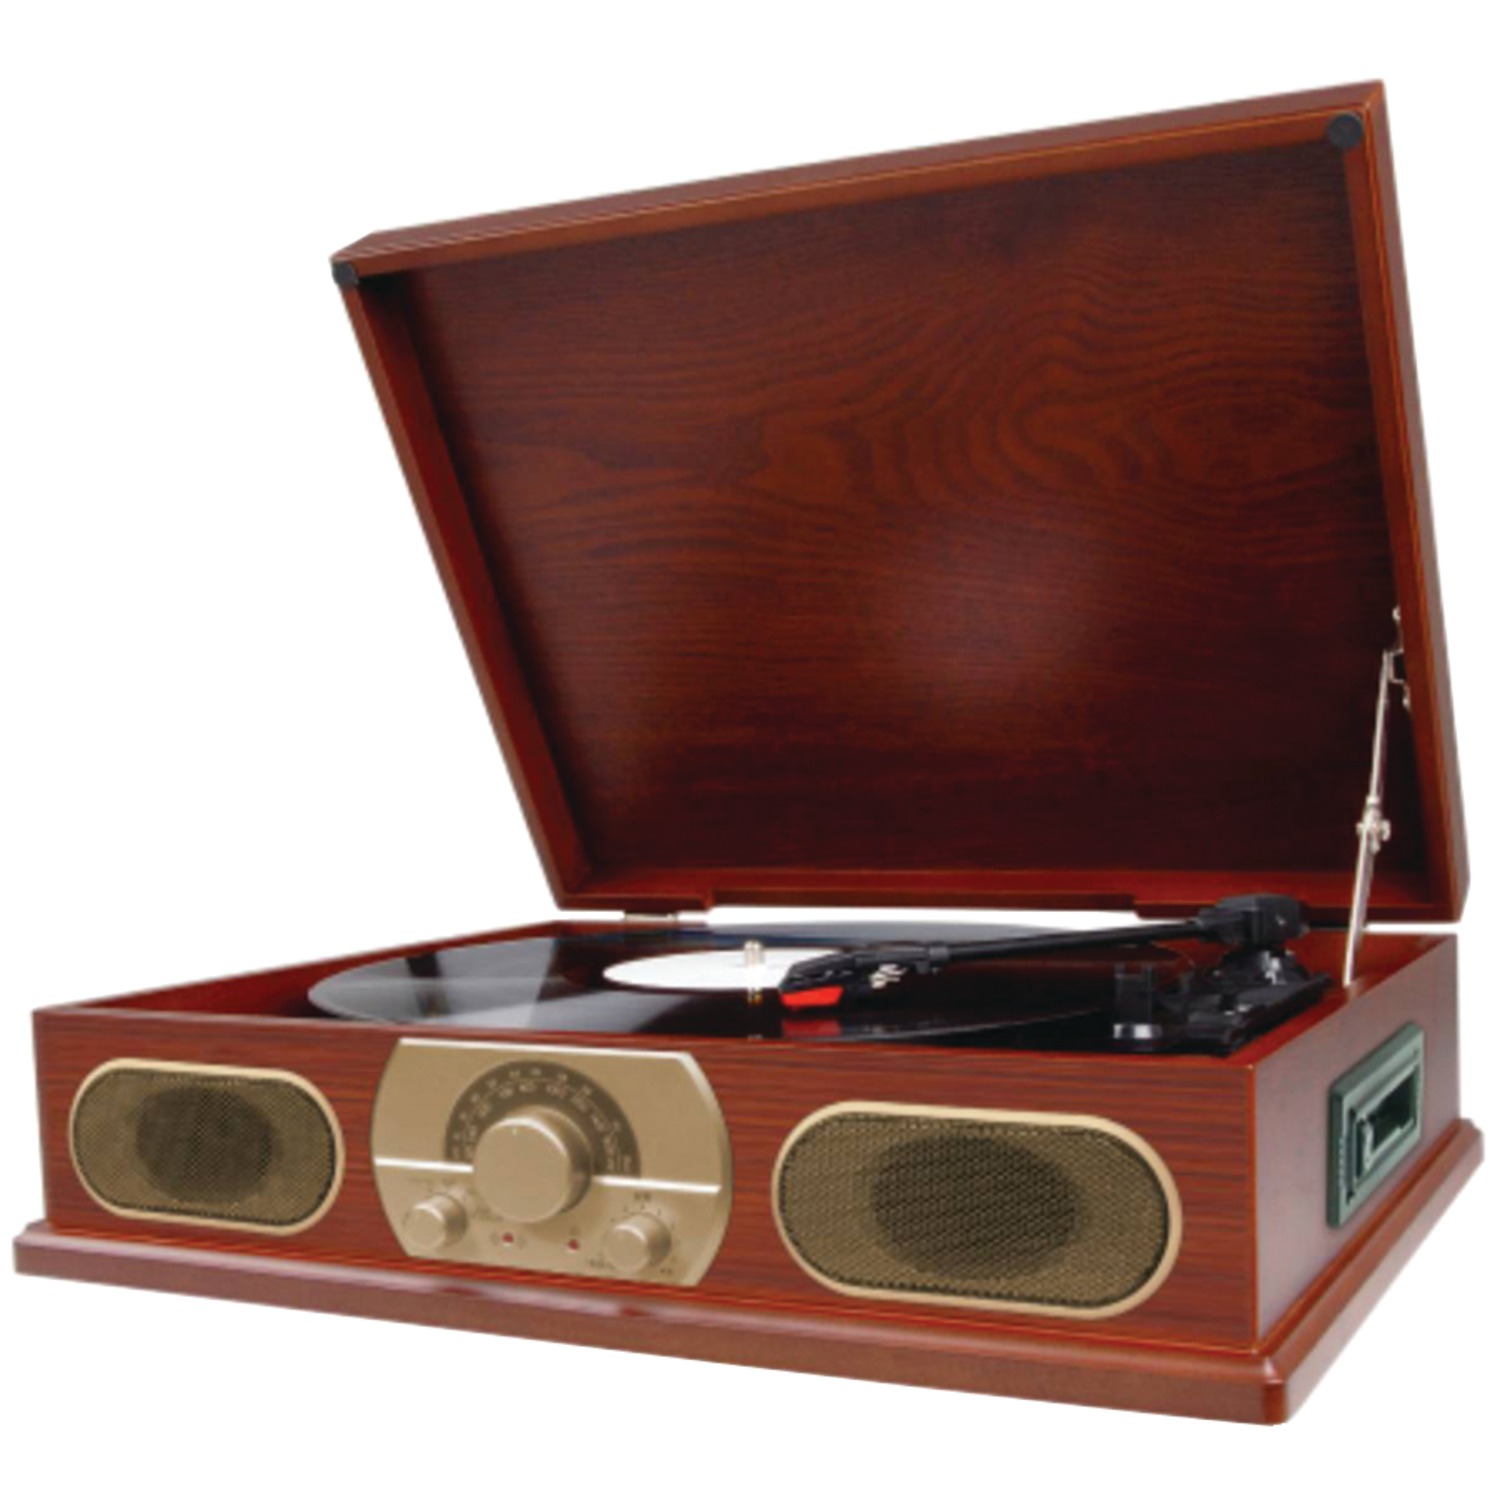 Studebaker SB6052 Wooden Turntable with AM/FM Radio & Cassette Player - image 1 of 6